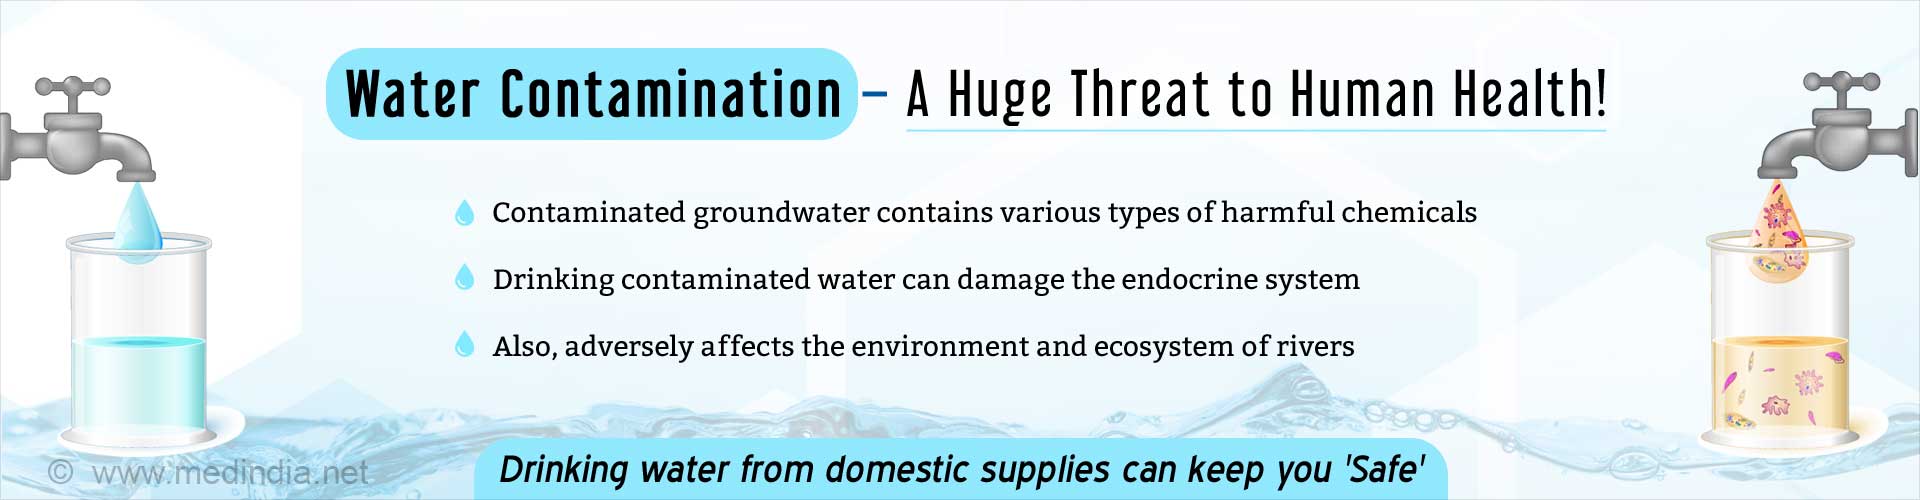 Water contamination - a huge threat to human health. Contaminated groundwater contains various types of harmful chemicals. Drinking contaminated water can damage the endocrine system. Also, adversely affects the environment and ecosystem of rivers. Drinking water from domestic supplies can keep you safe.